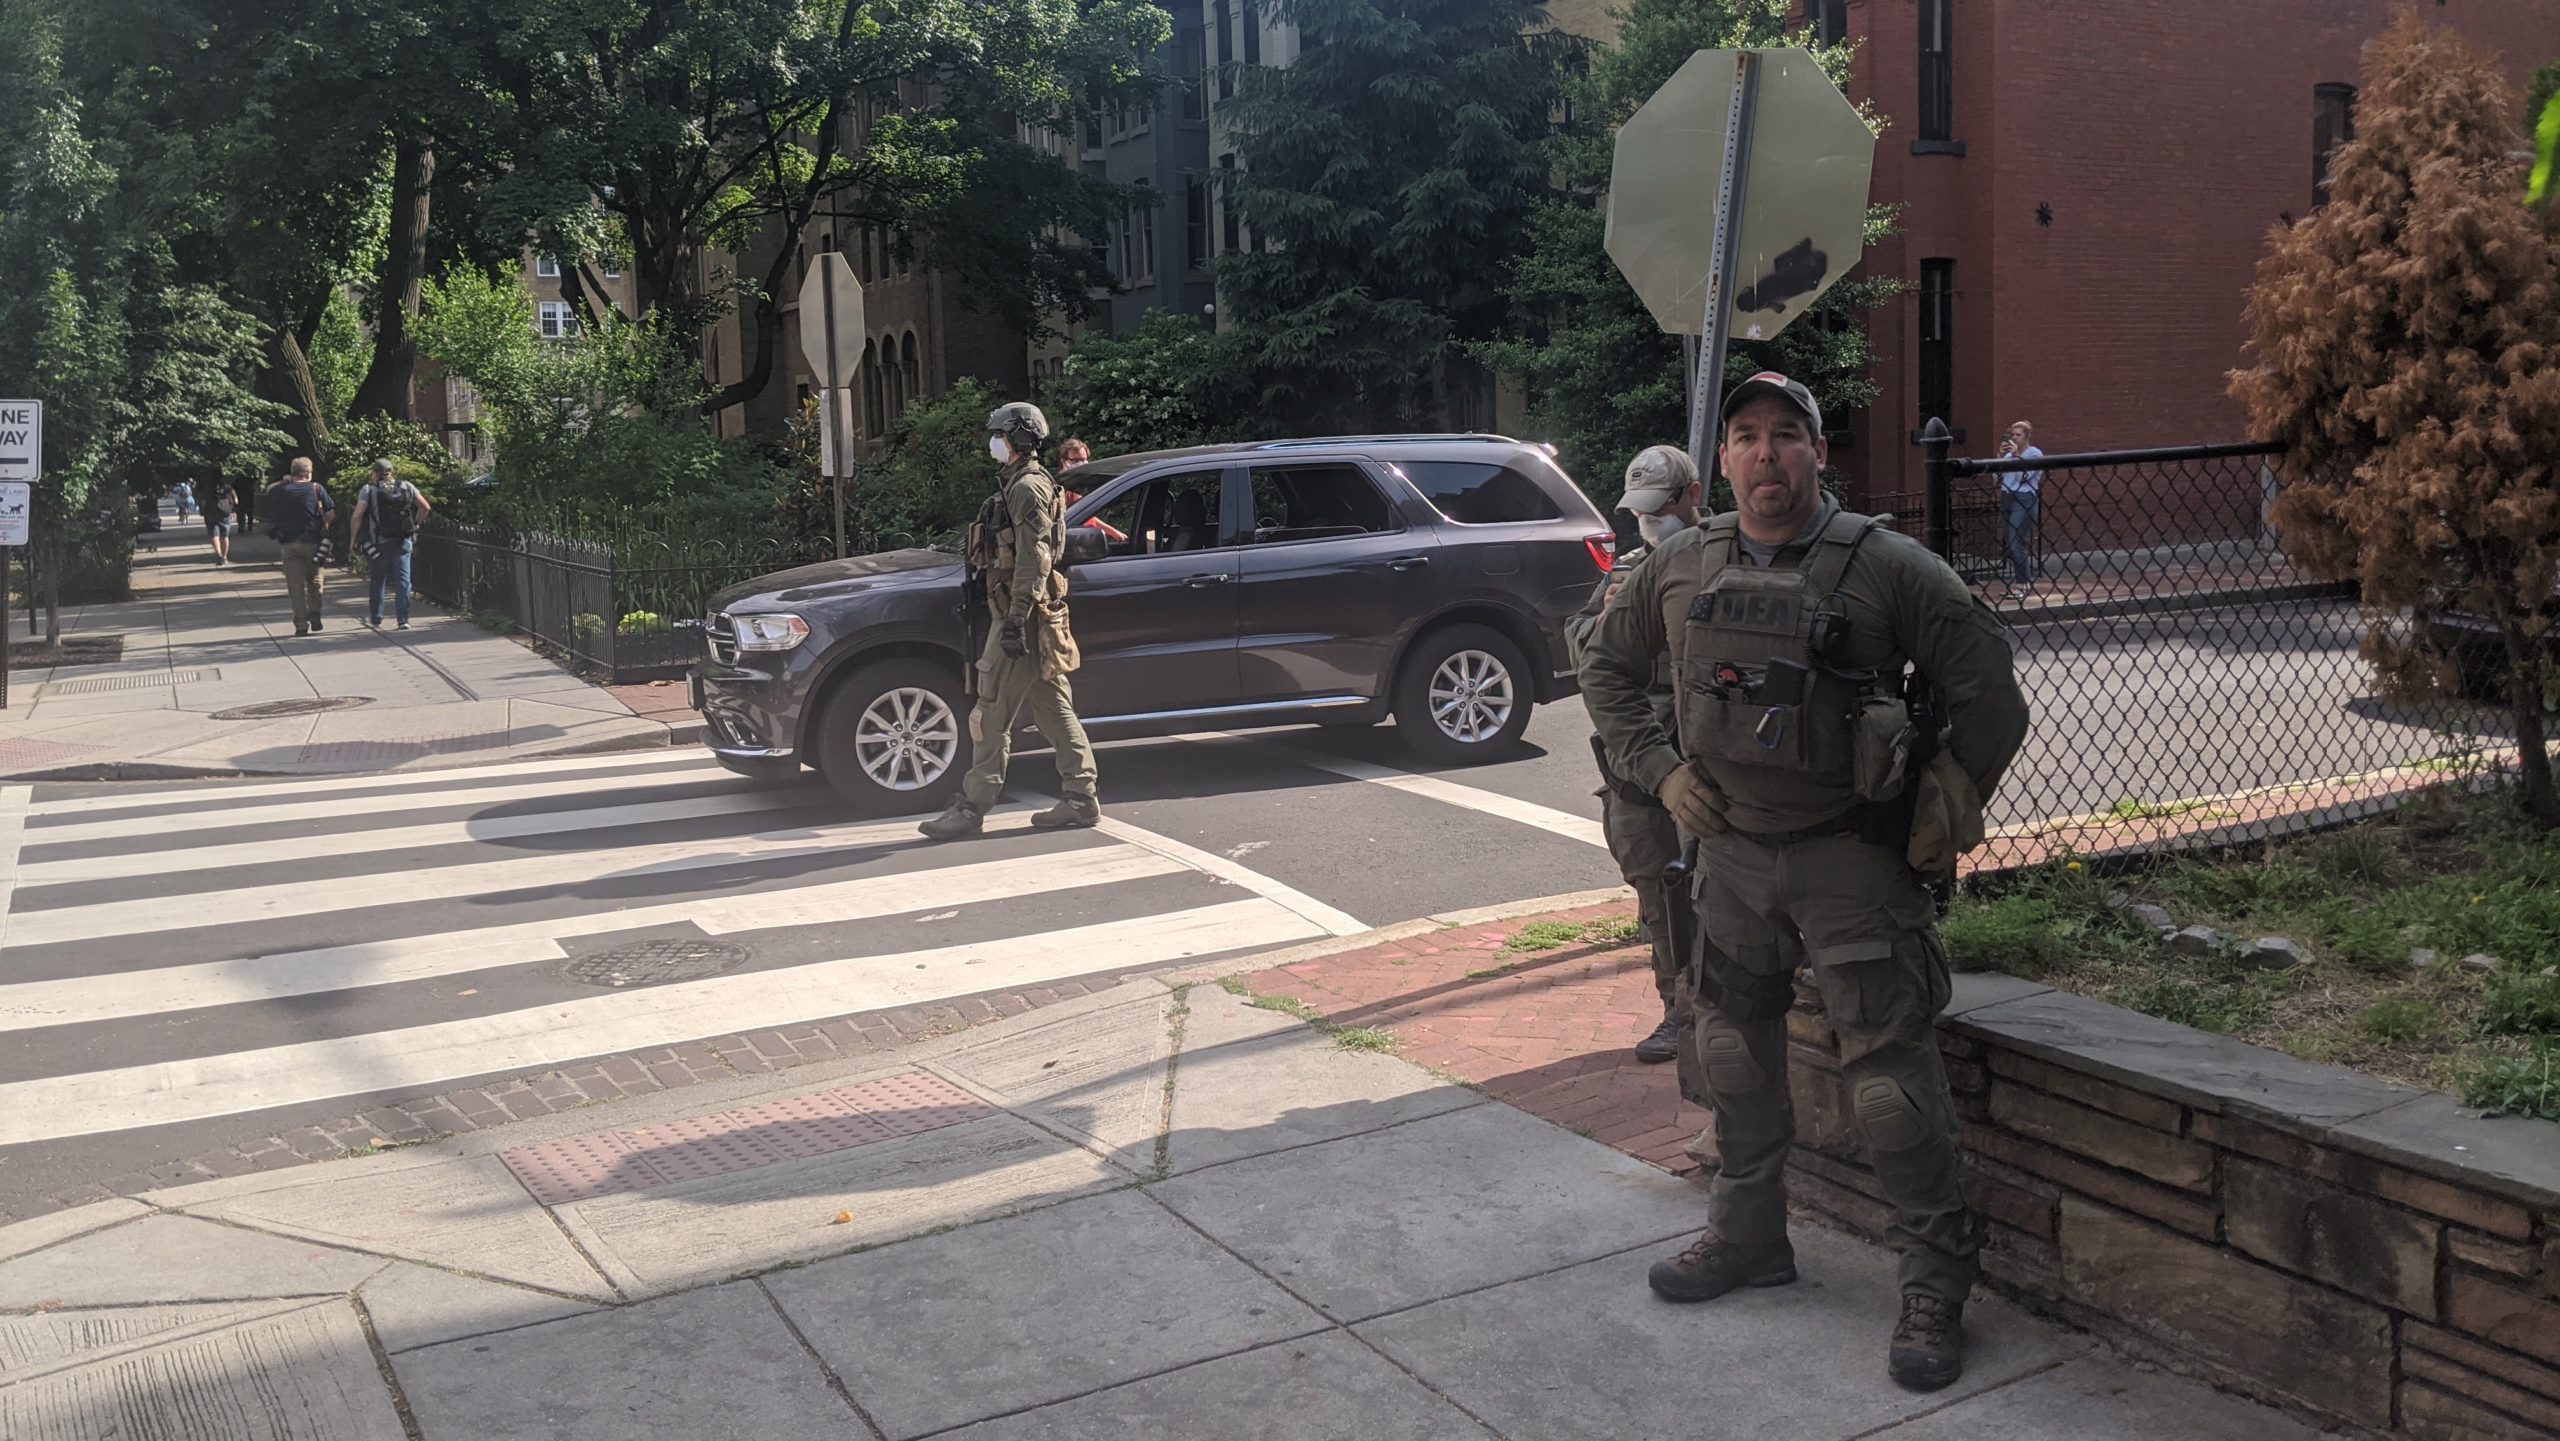 Federal agents with vests identifying them as Drug Enforcement Administration officers deployed in D.C. on June 2. (Photo: Tom McKay, Gizmodo)